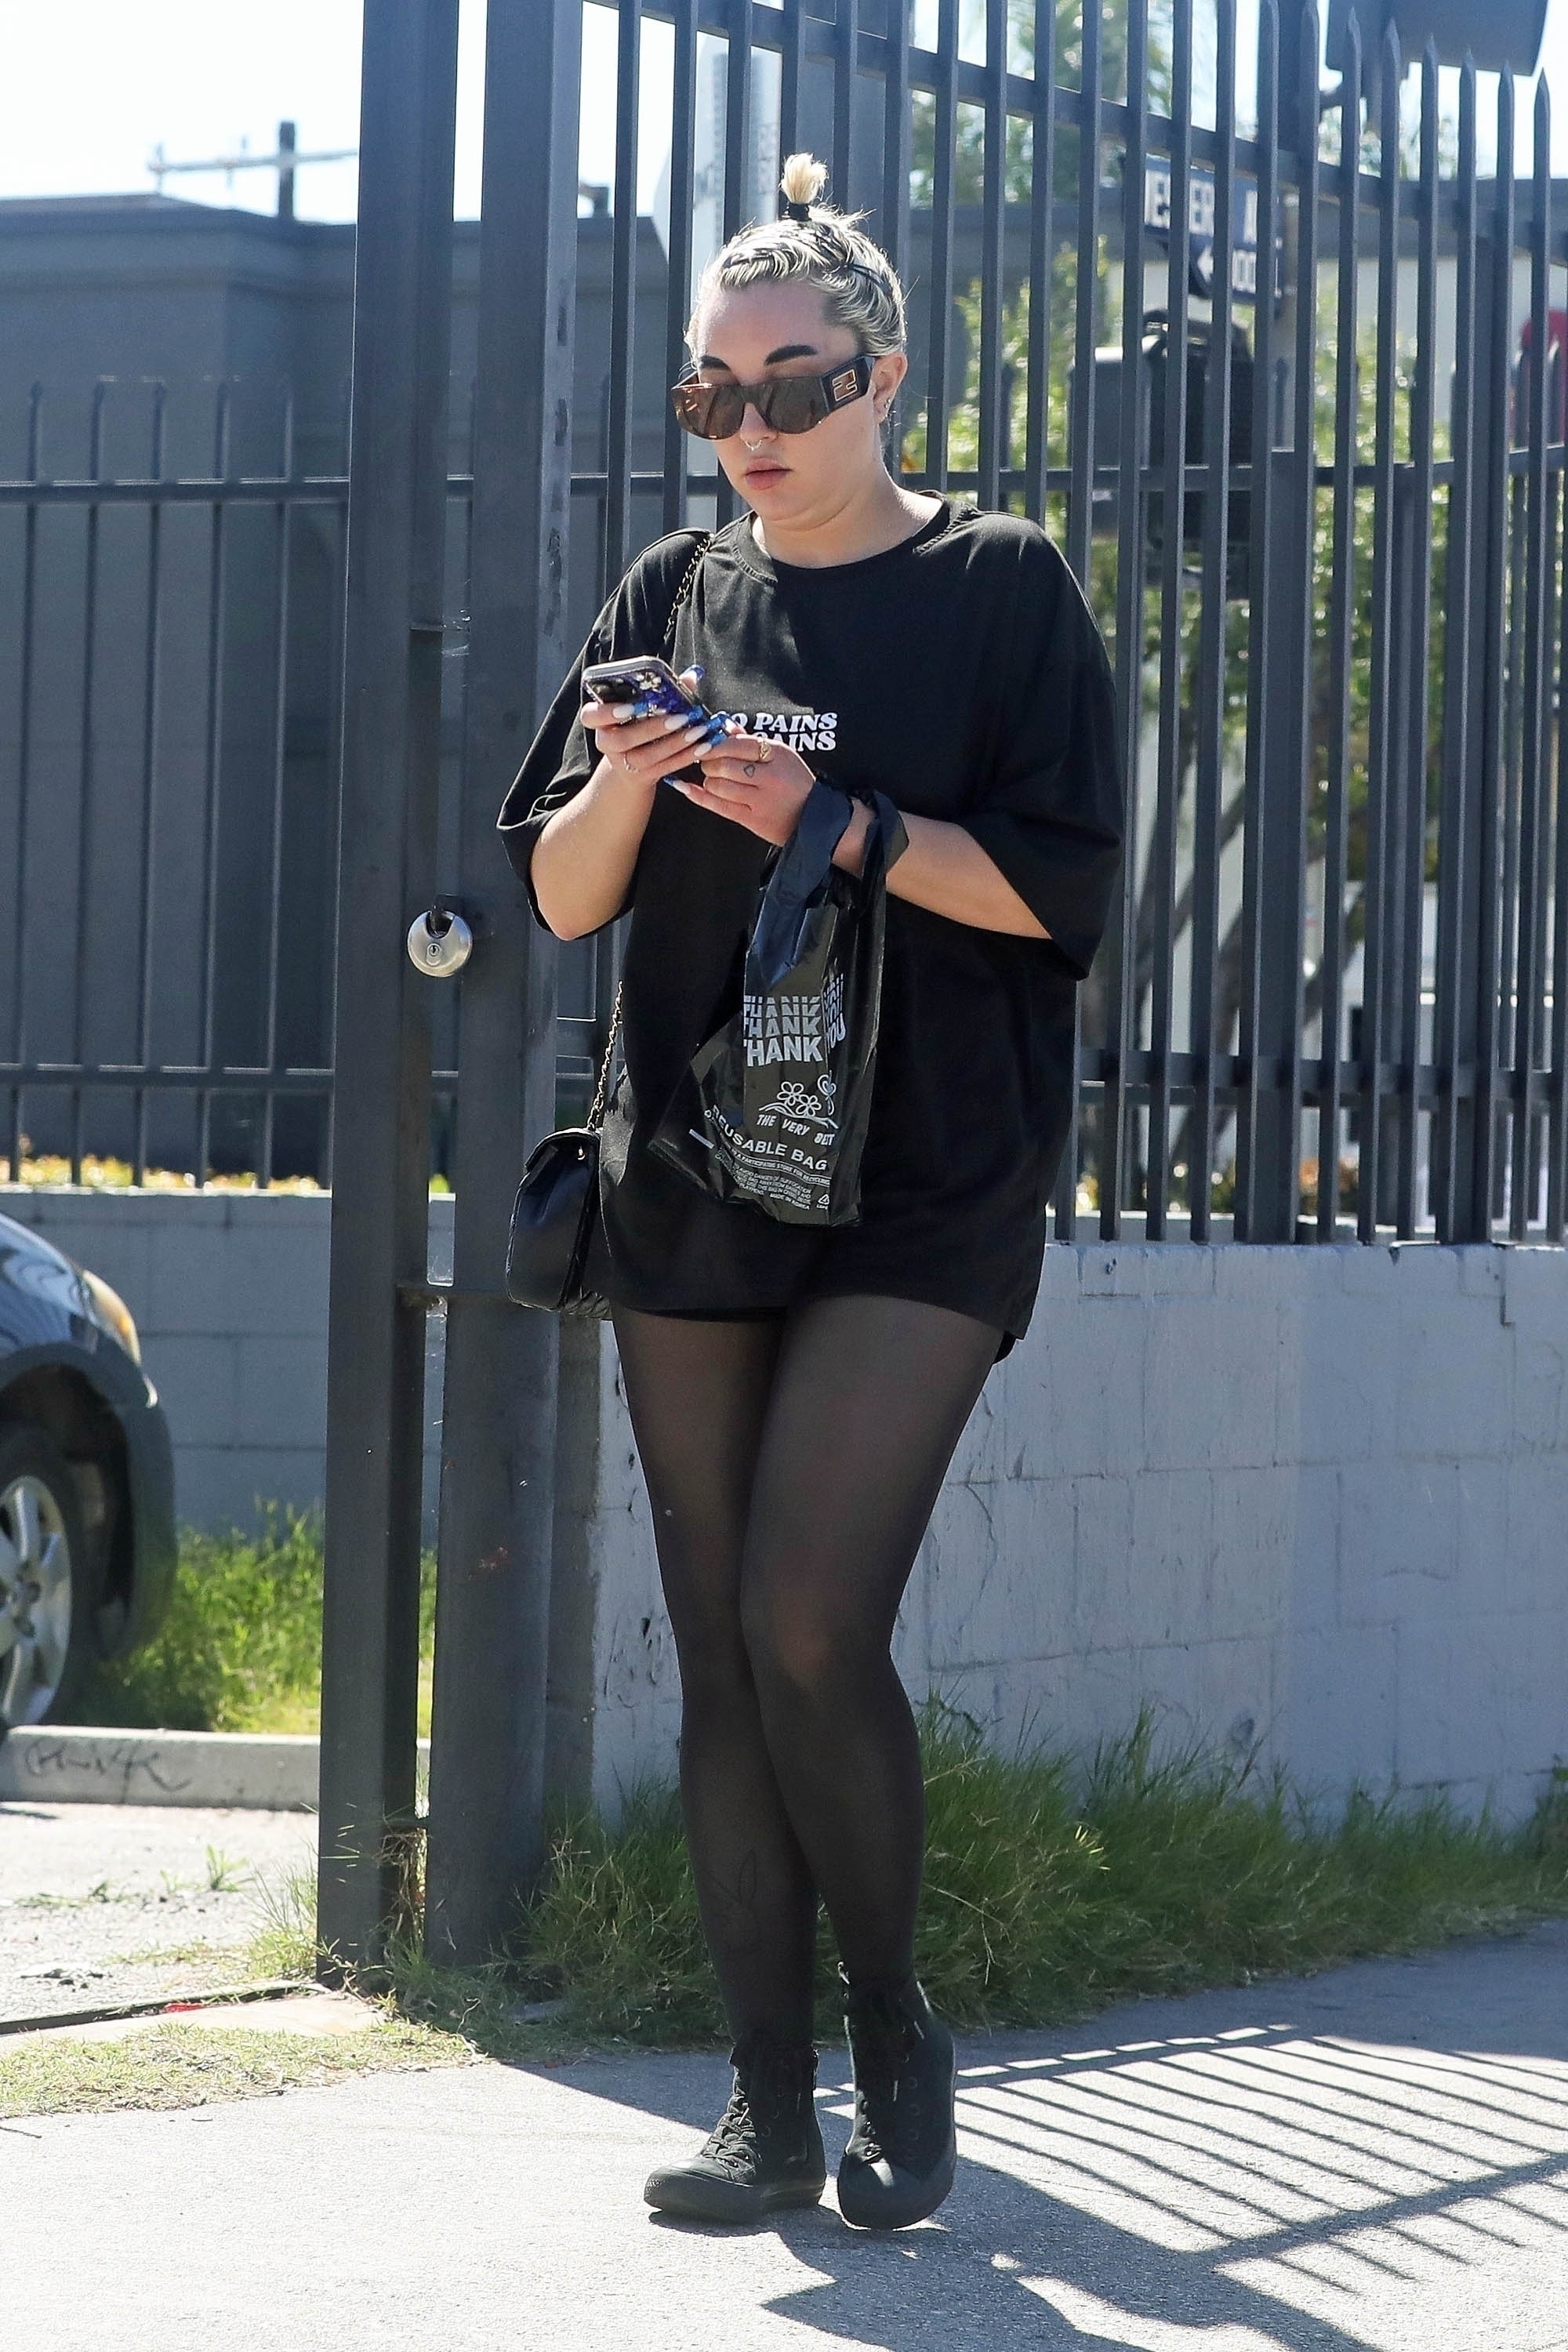 She wore sheer black leggings, a baggy graphic T-shirt, boots, and her hair in a tight bun